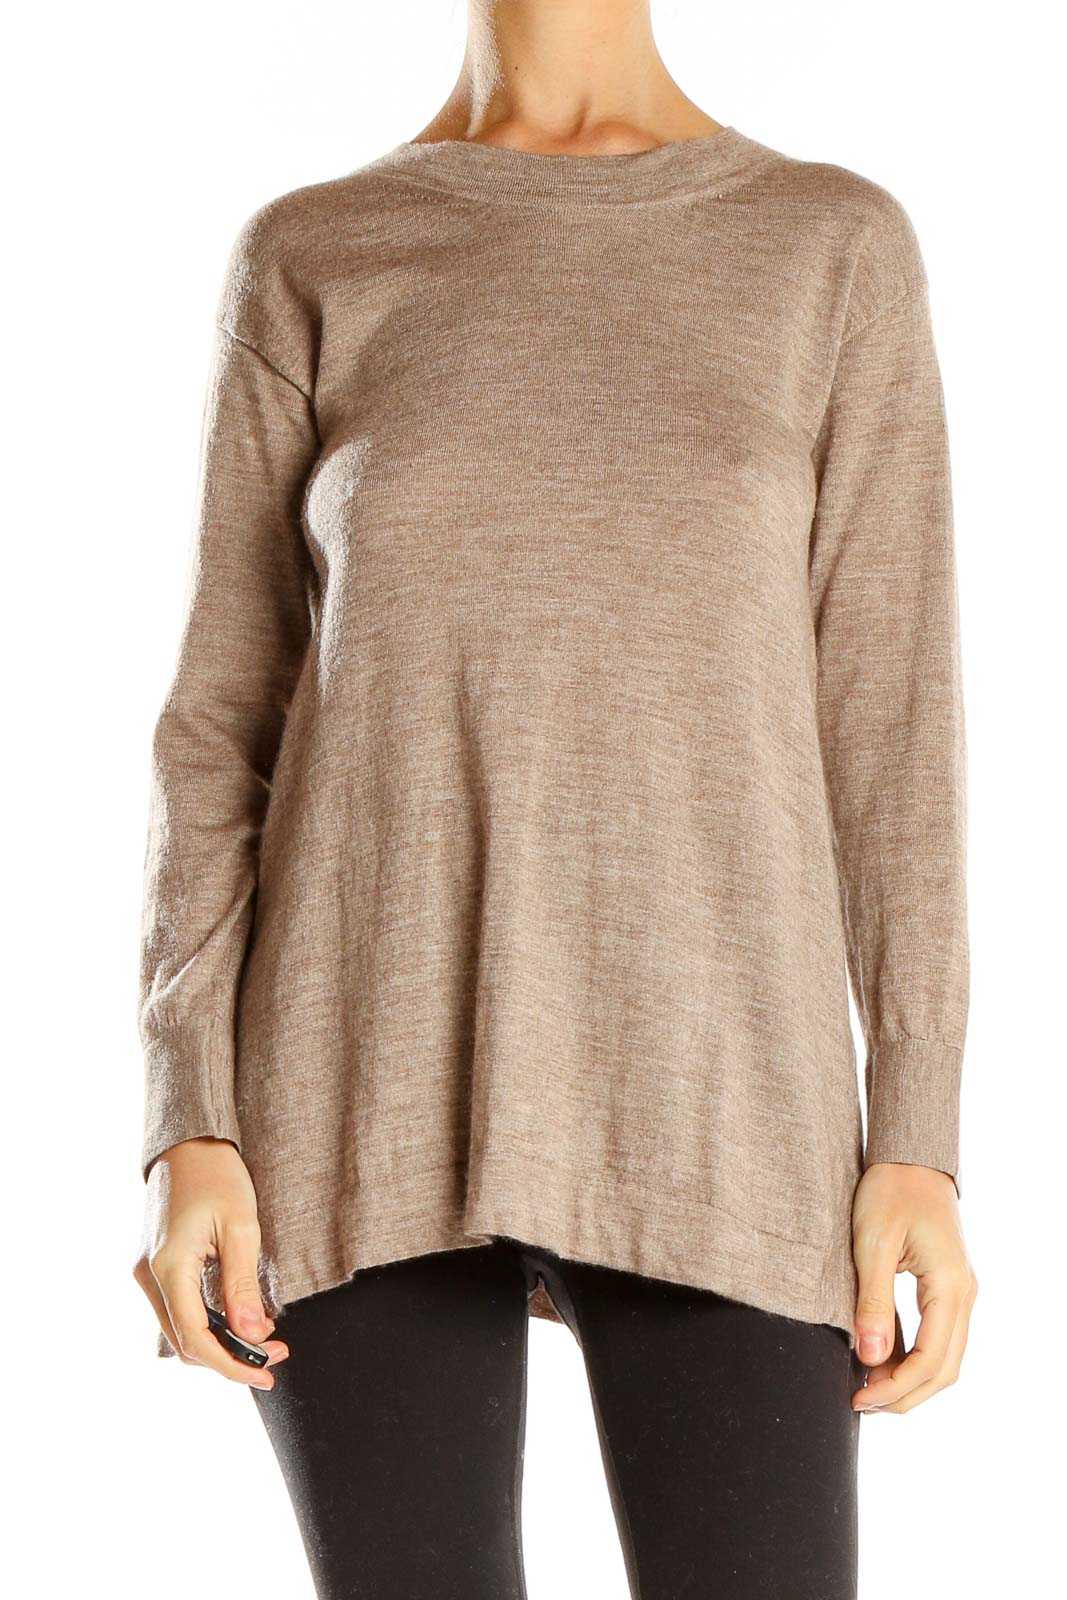 Brown Light Woven Top Front